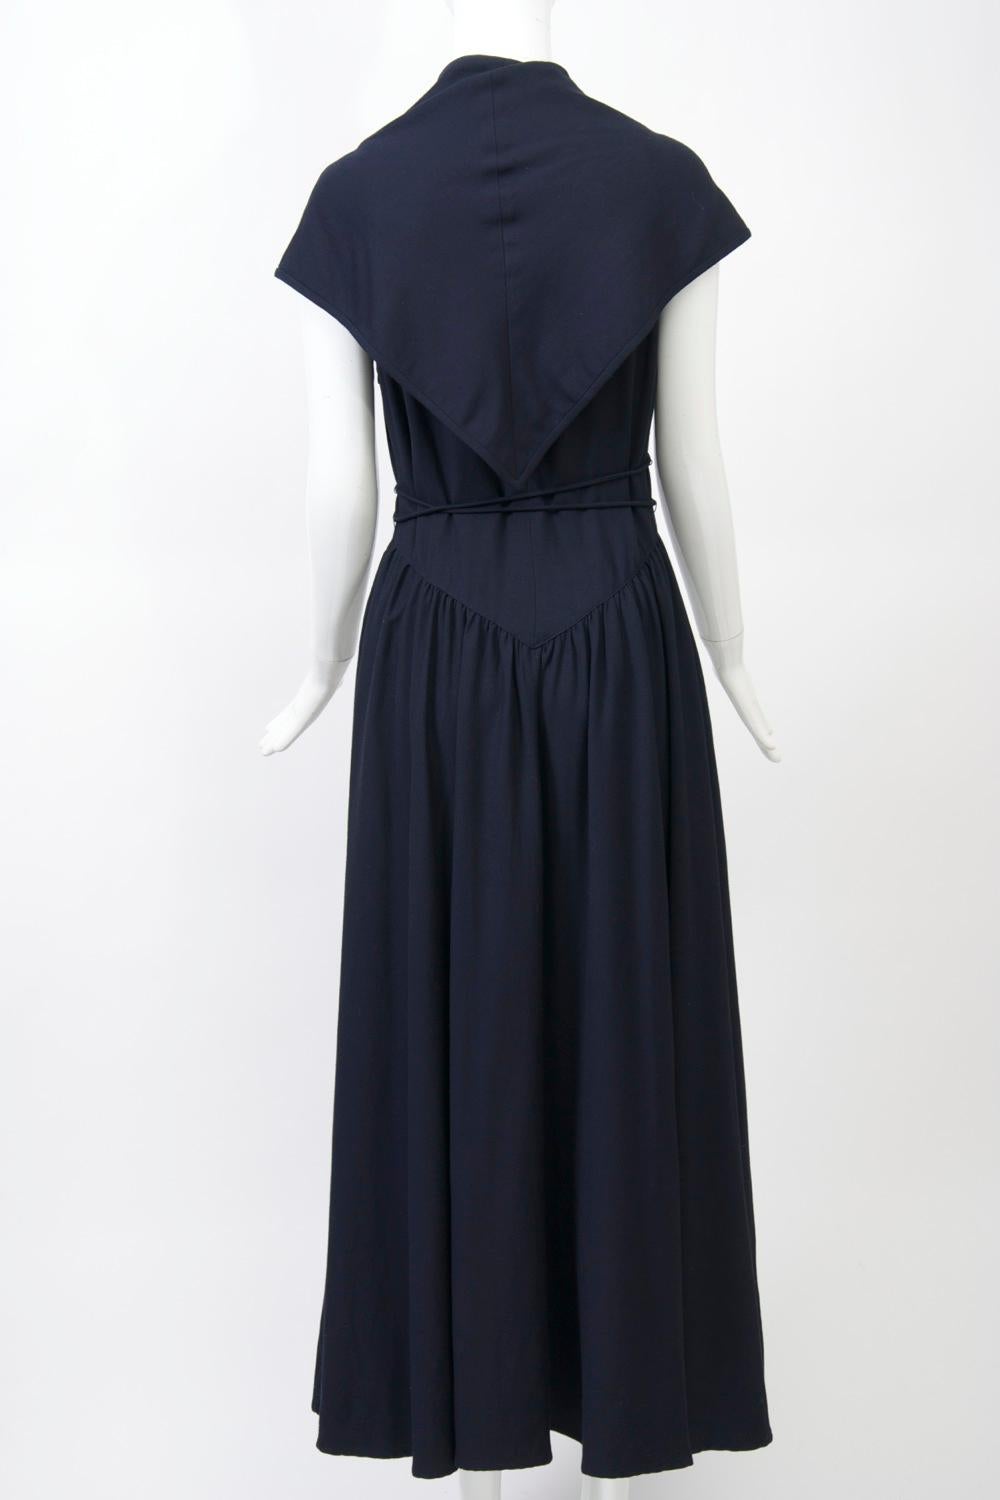 Women's Kathryn Dianos Navy Maxi Dress For Sale